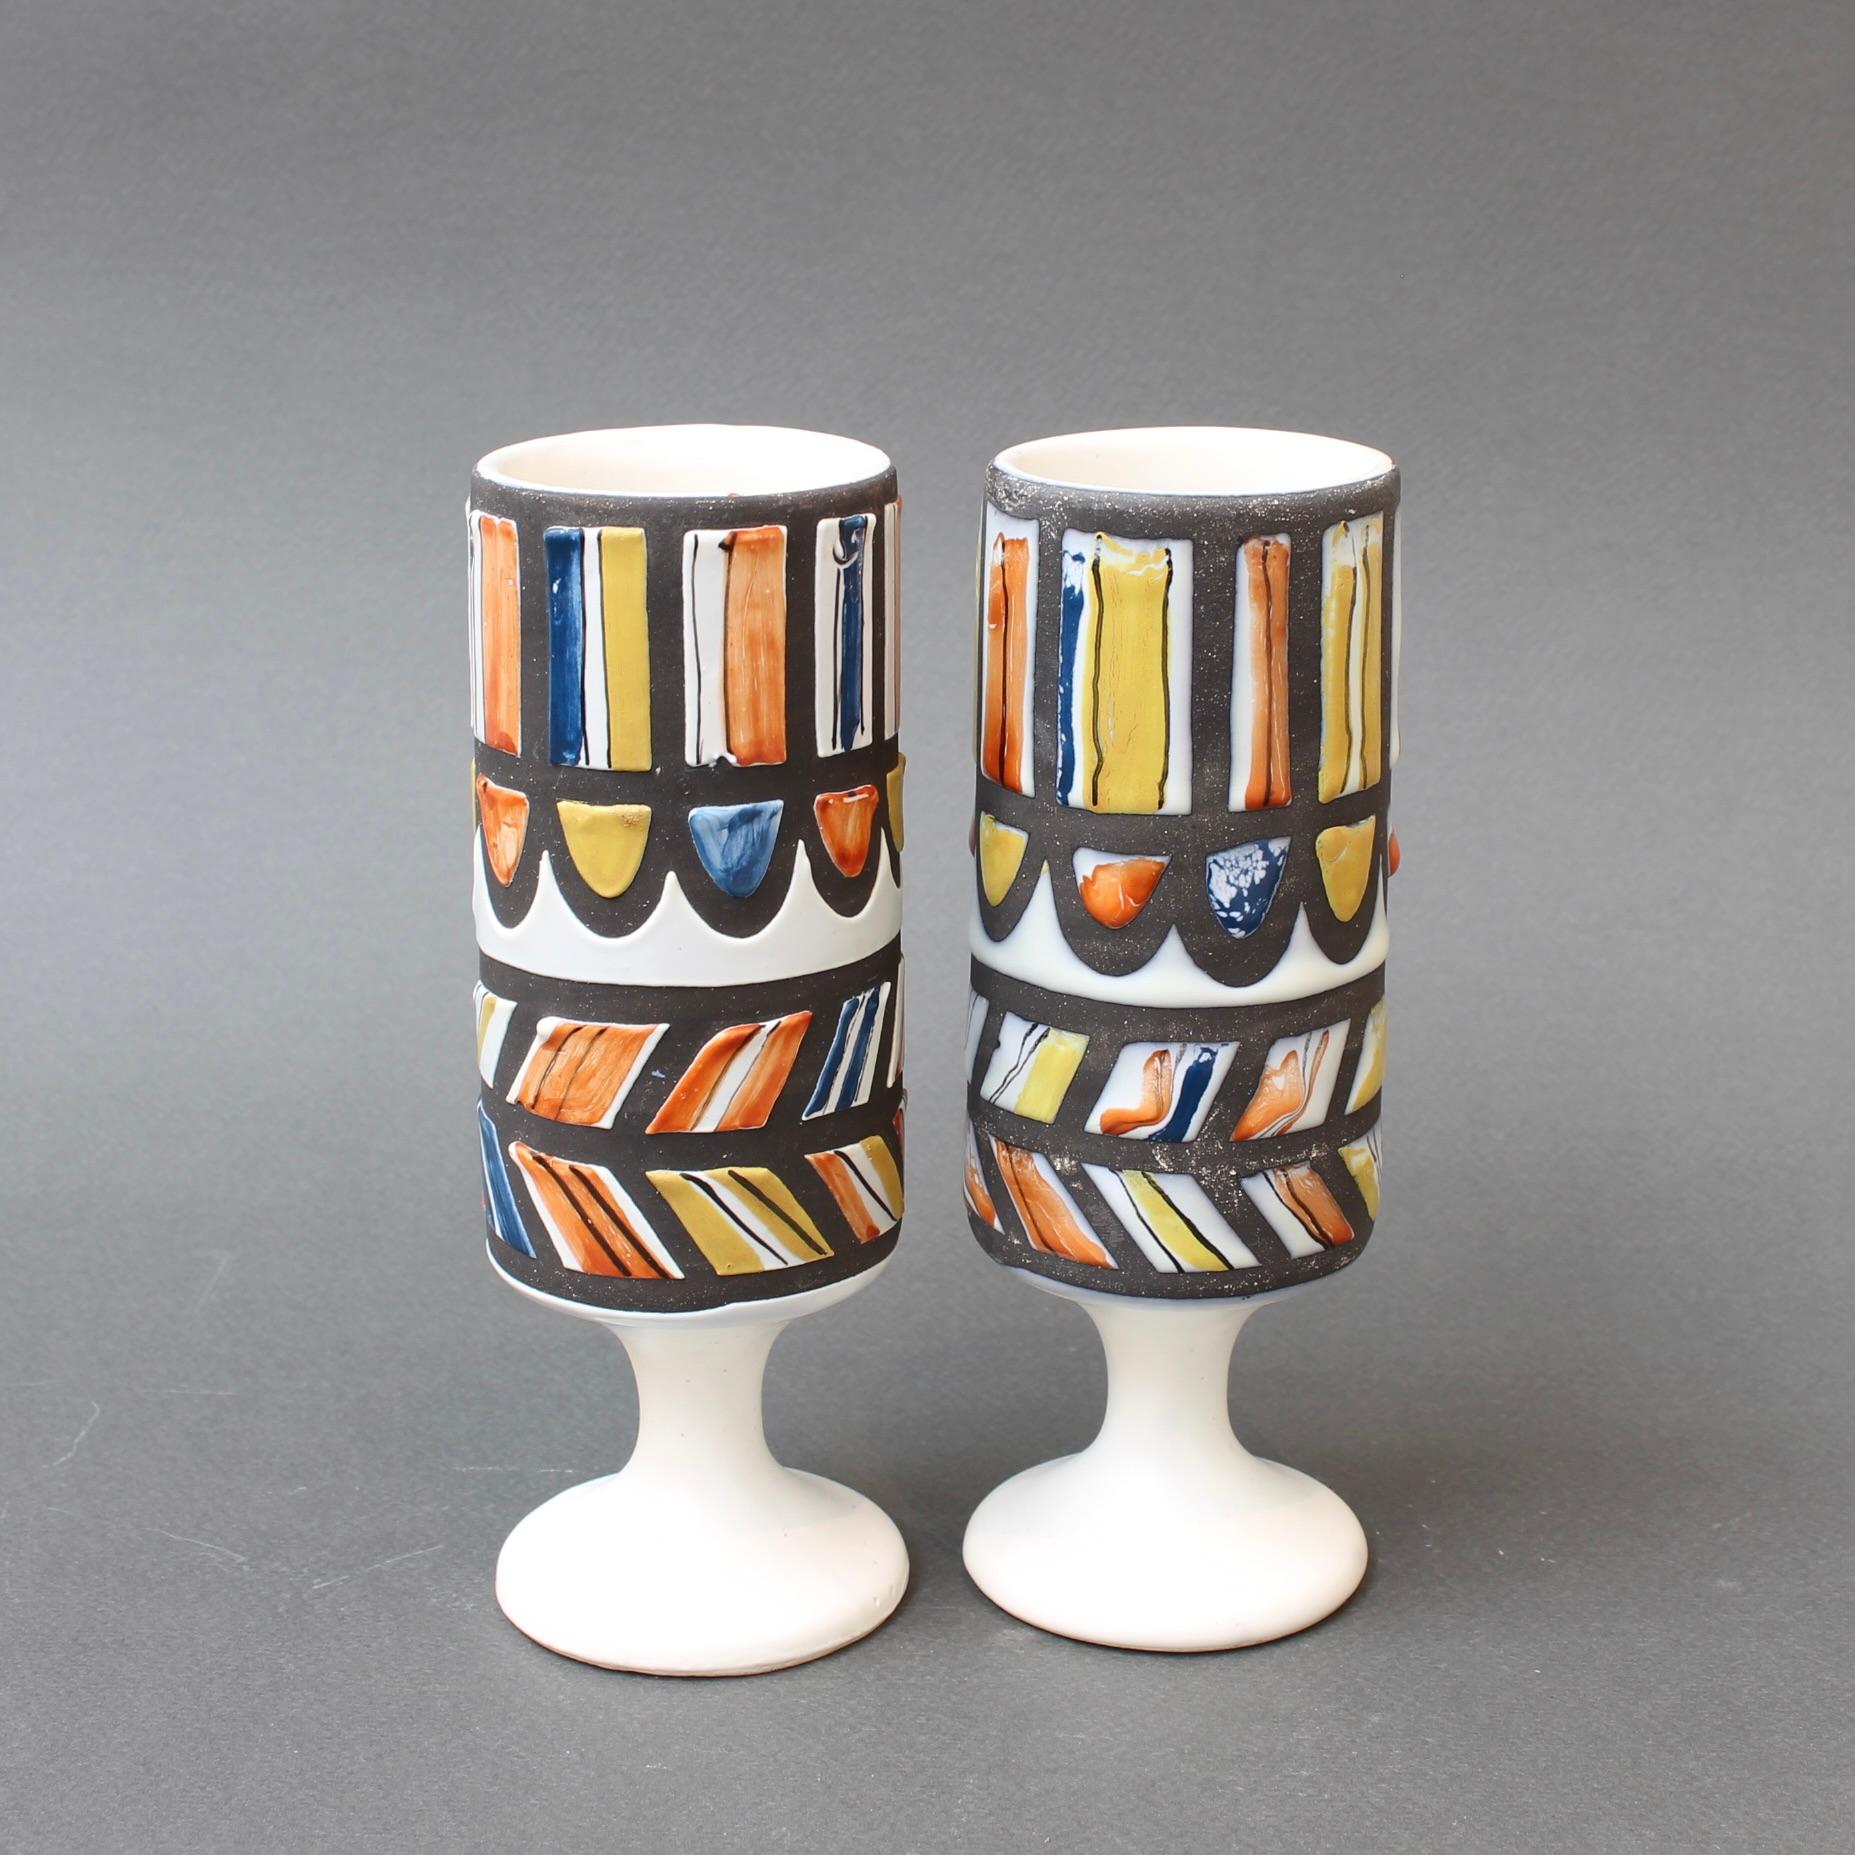 Vintage French Ceramic Set of Vessels by Roger Capron (circa 1960s) For Sale 3